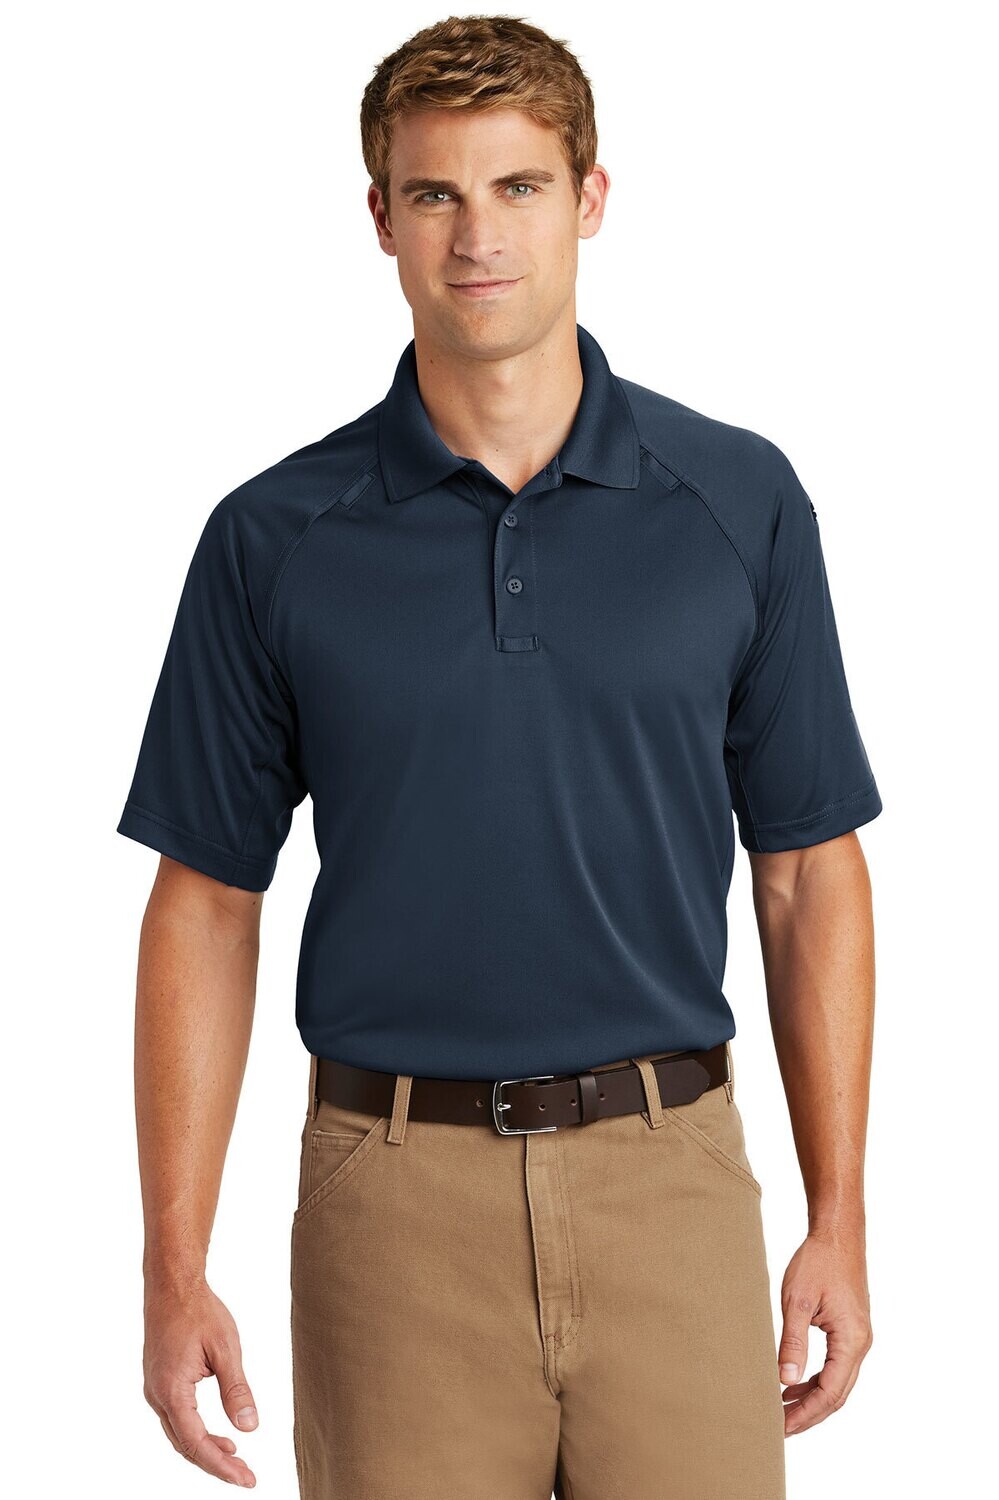 CS410 SNAG PROOF TACTICAL POLO WITH MIC CLIPS